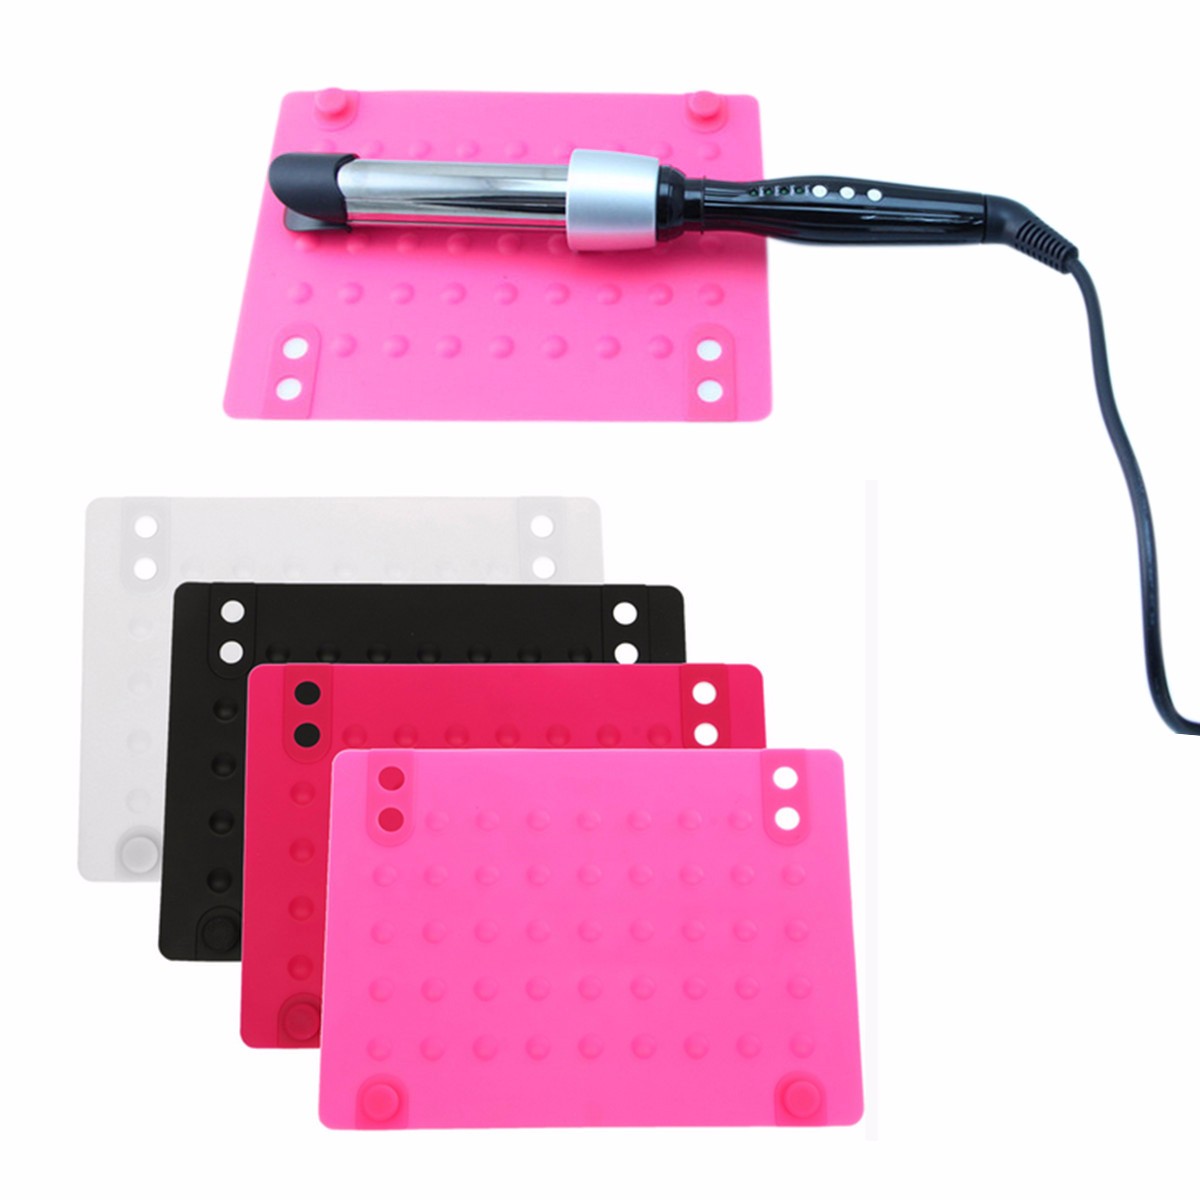 Silicone Heat Resistant Mat For Hair Straightener Curling Iron Pad Hair Styling Adapter Salon Styling Straightener Tool